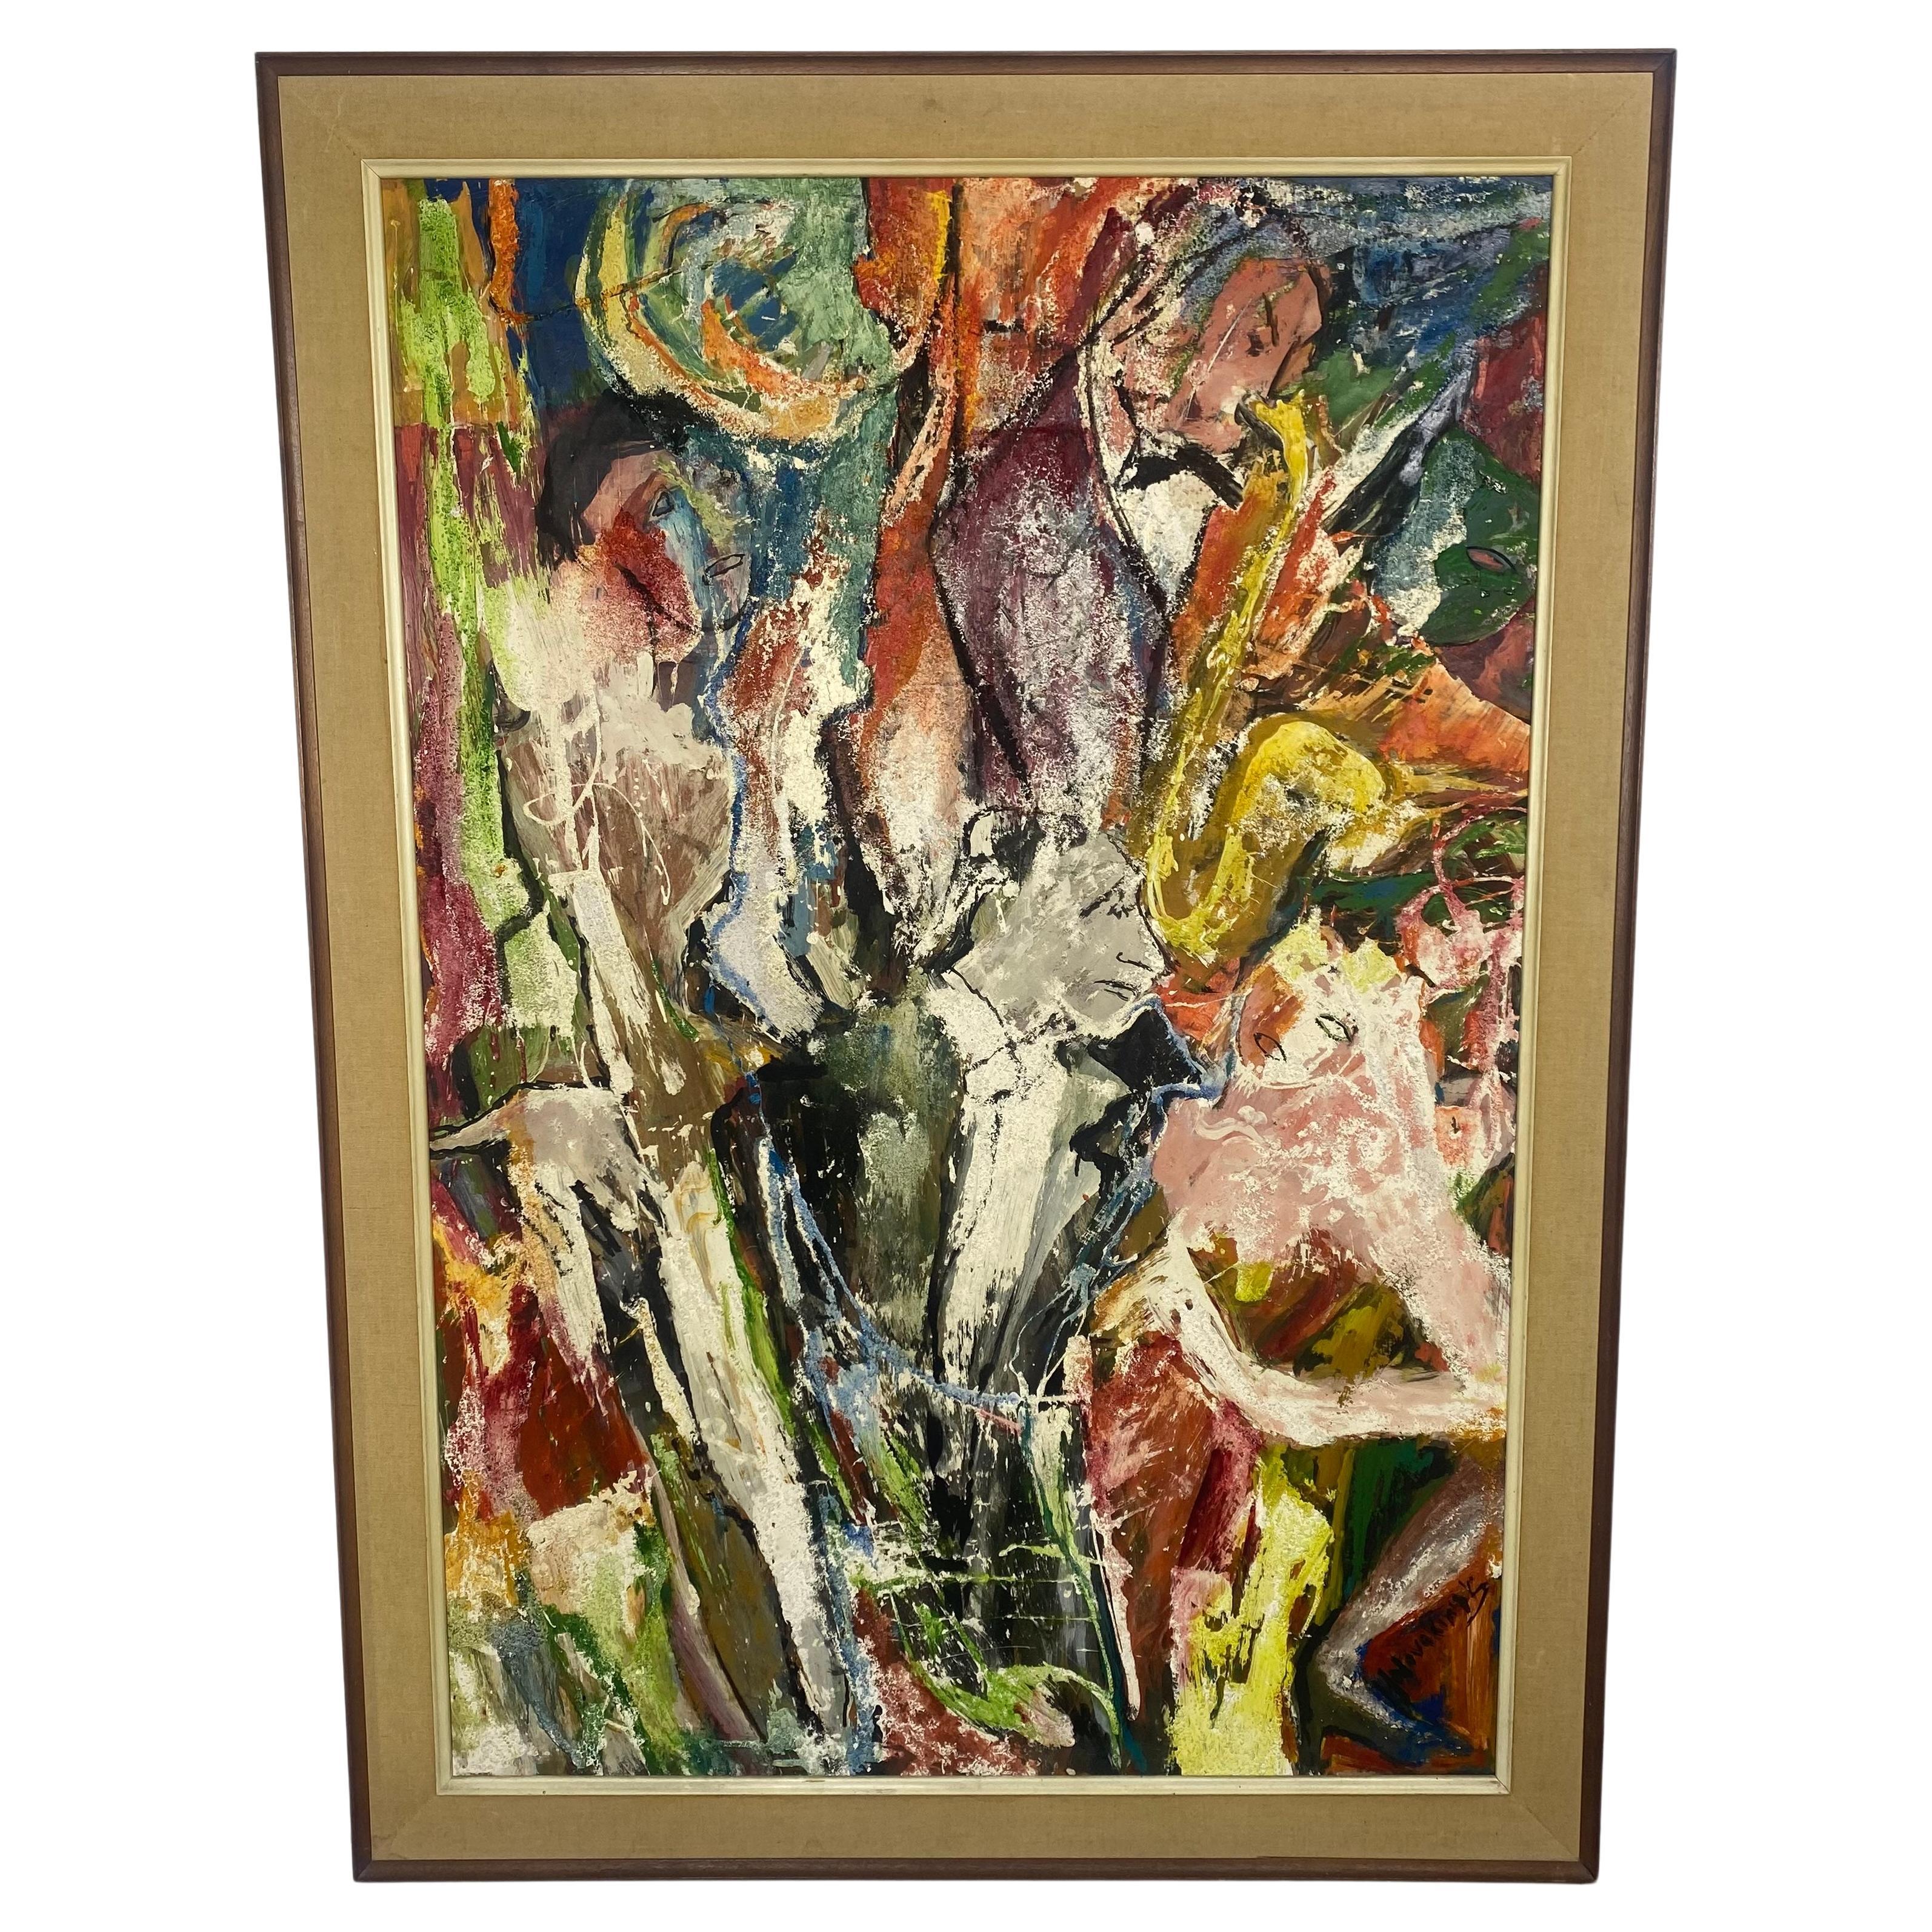 Large Modern Abstract Impasto Oil Painting on Board, "Night Club" Jazz